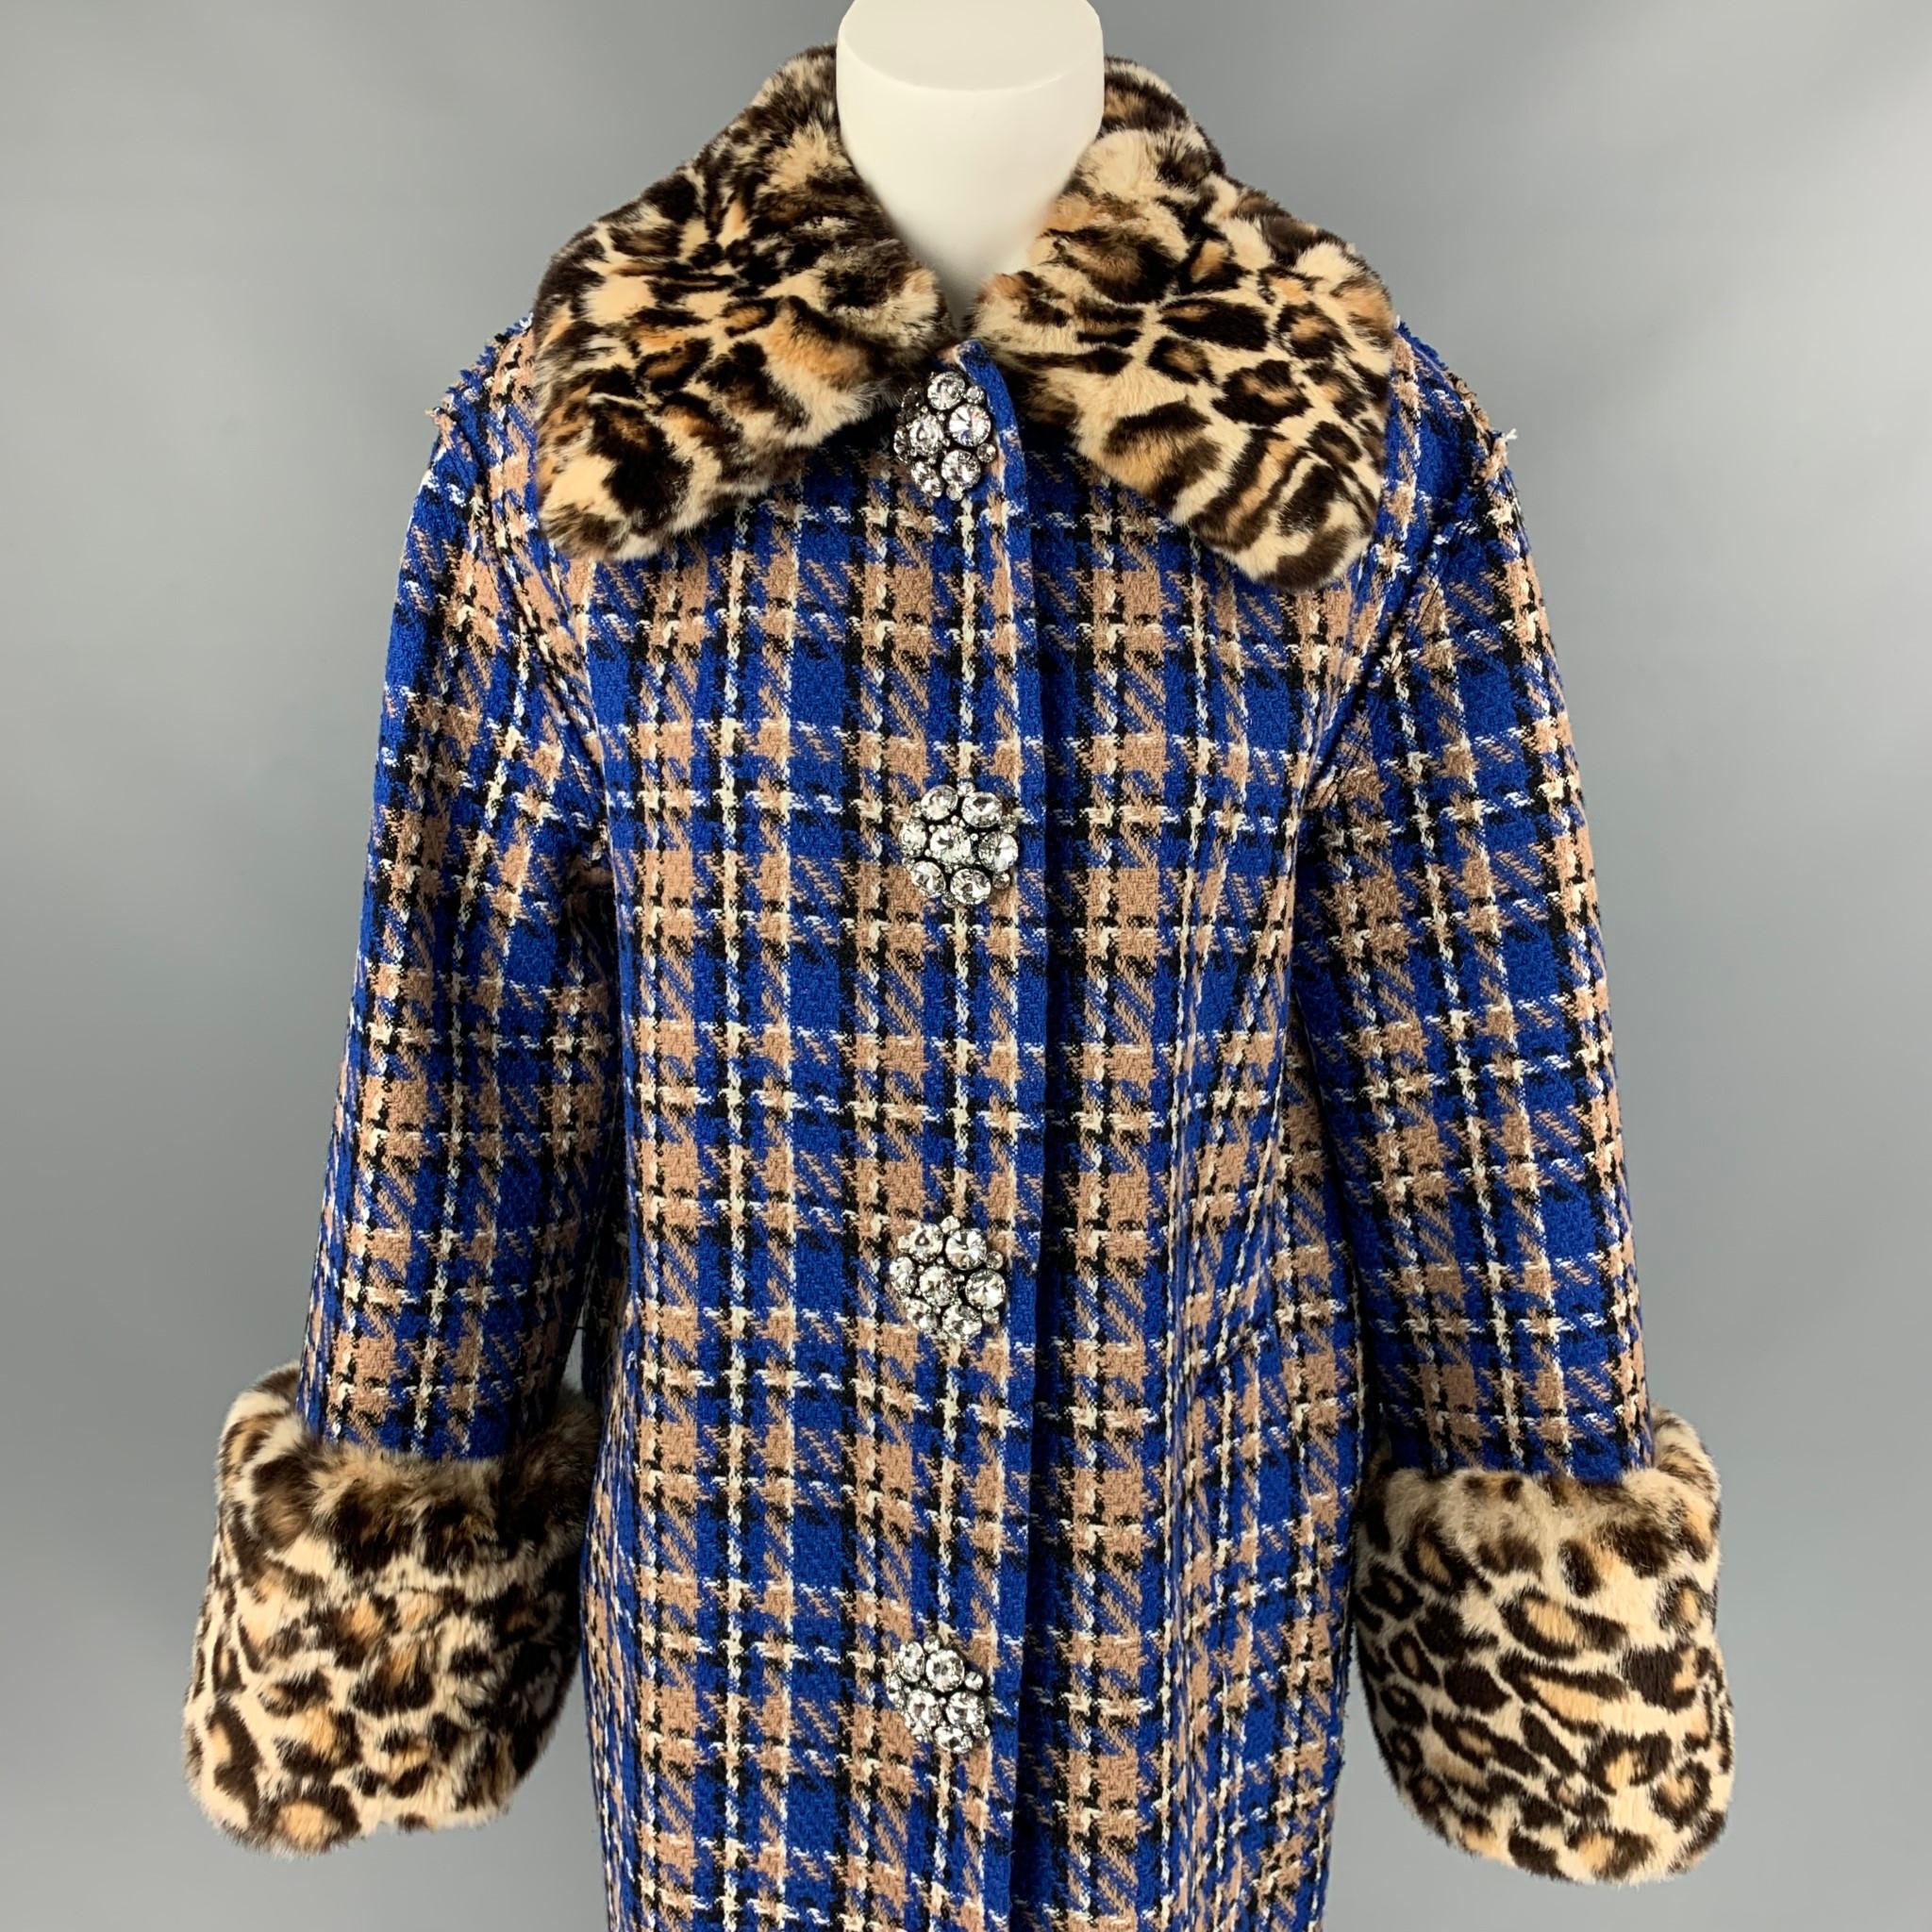 MARC JACOBS coat comes in a blue & tan wool / polyamide with a full silk poodle print liner featuring a rabbit fur trim, large collar & cuffs, slit pockets, and a crystal button closure. Made in USA. 

Very Good Pre-Owned Condition.
Marked: